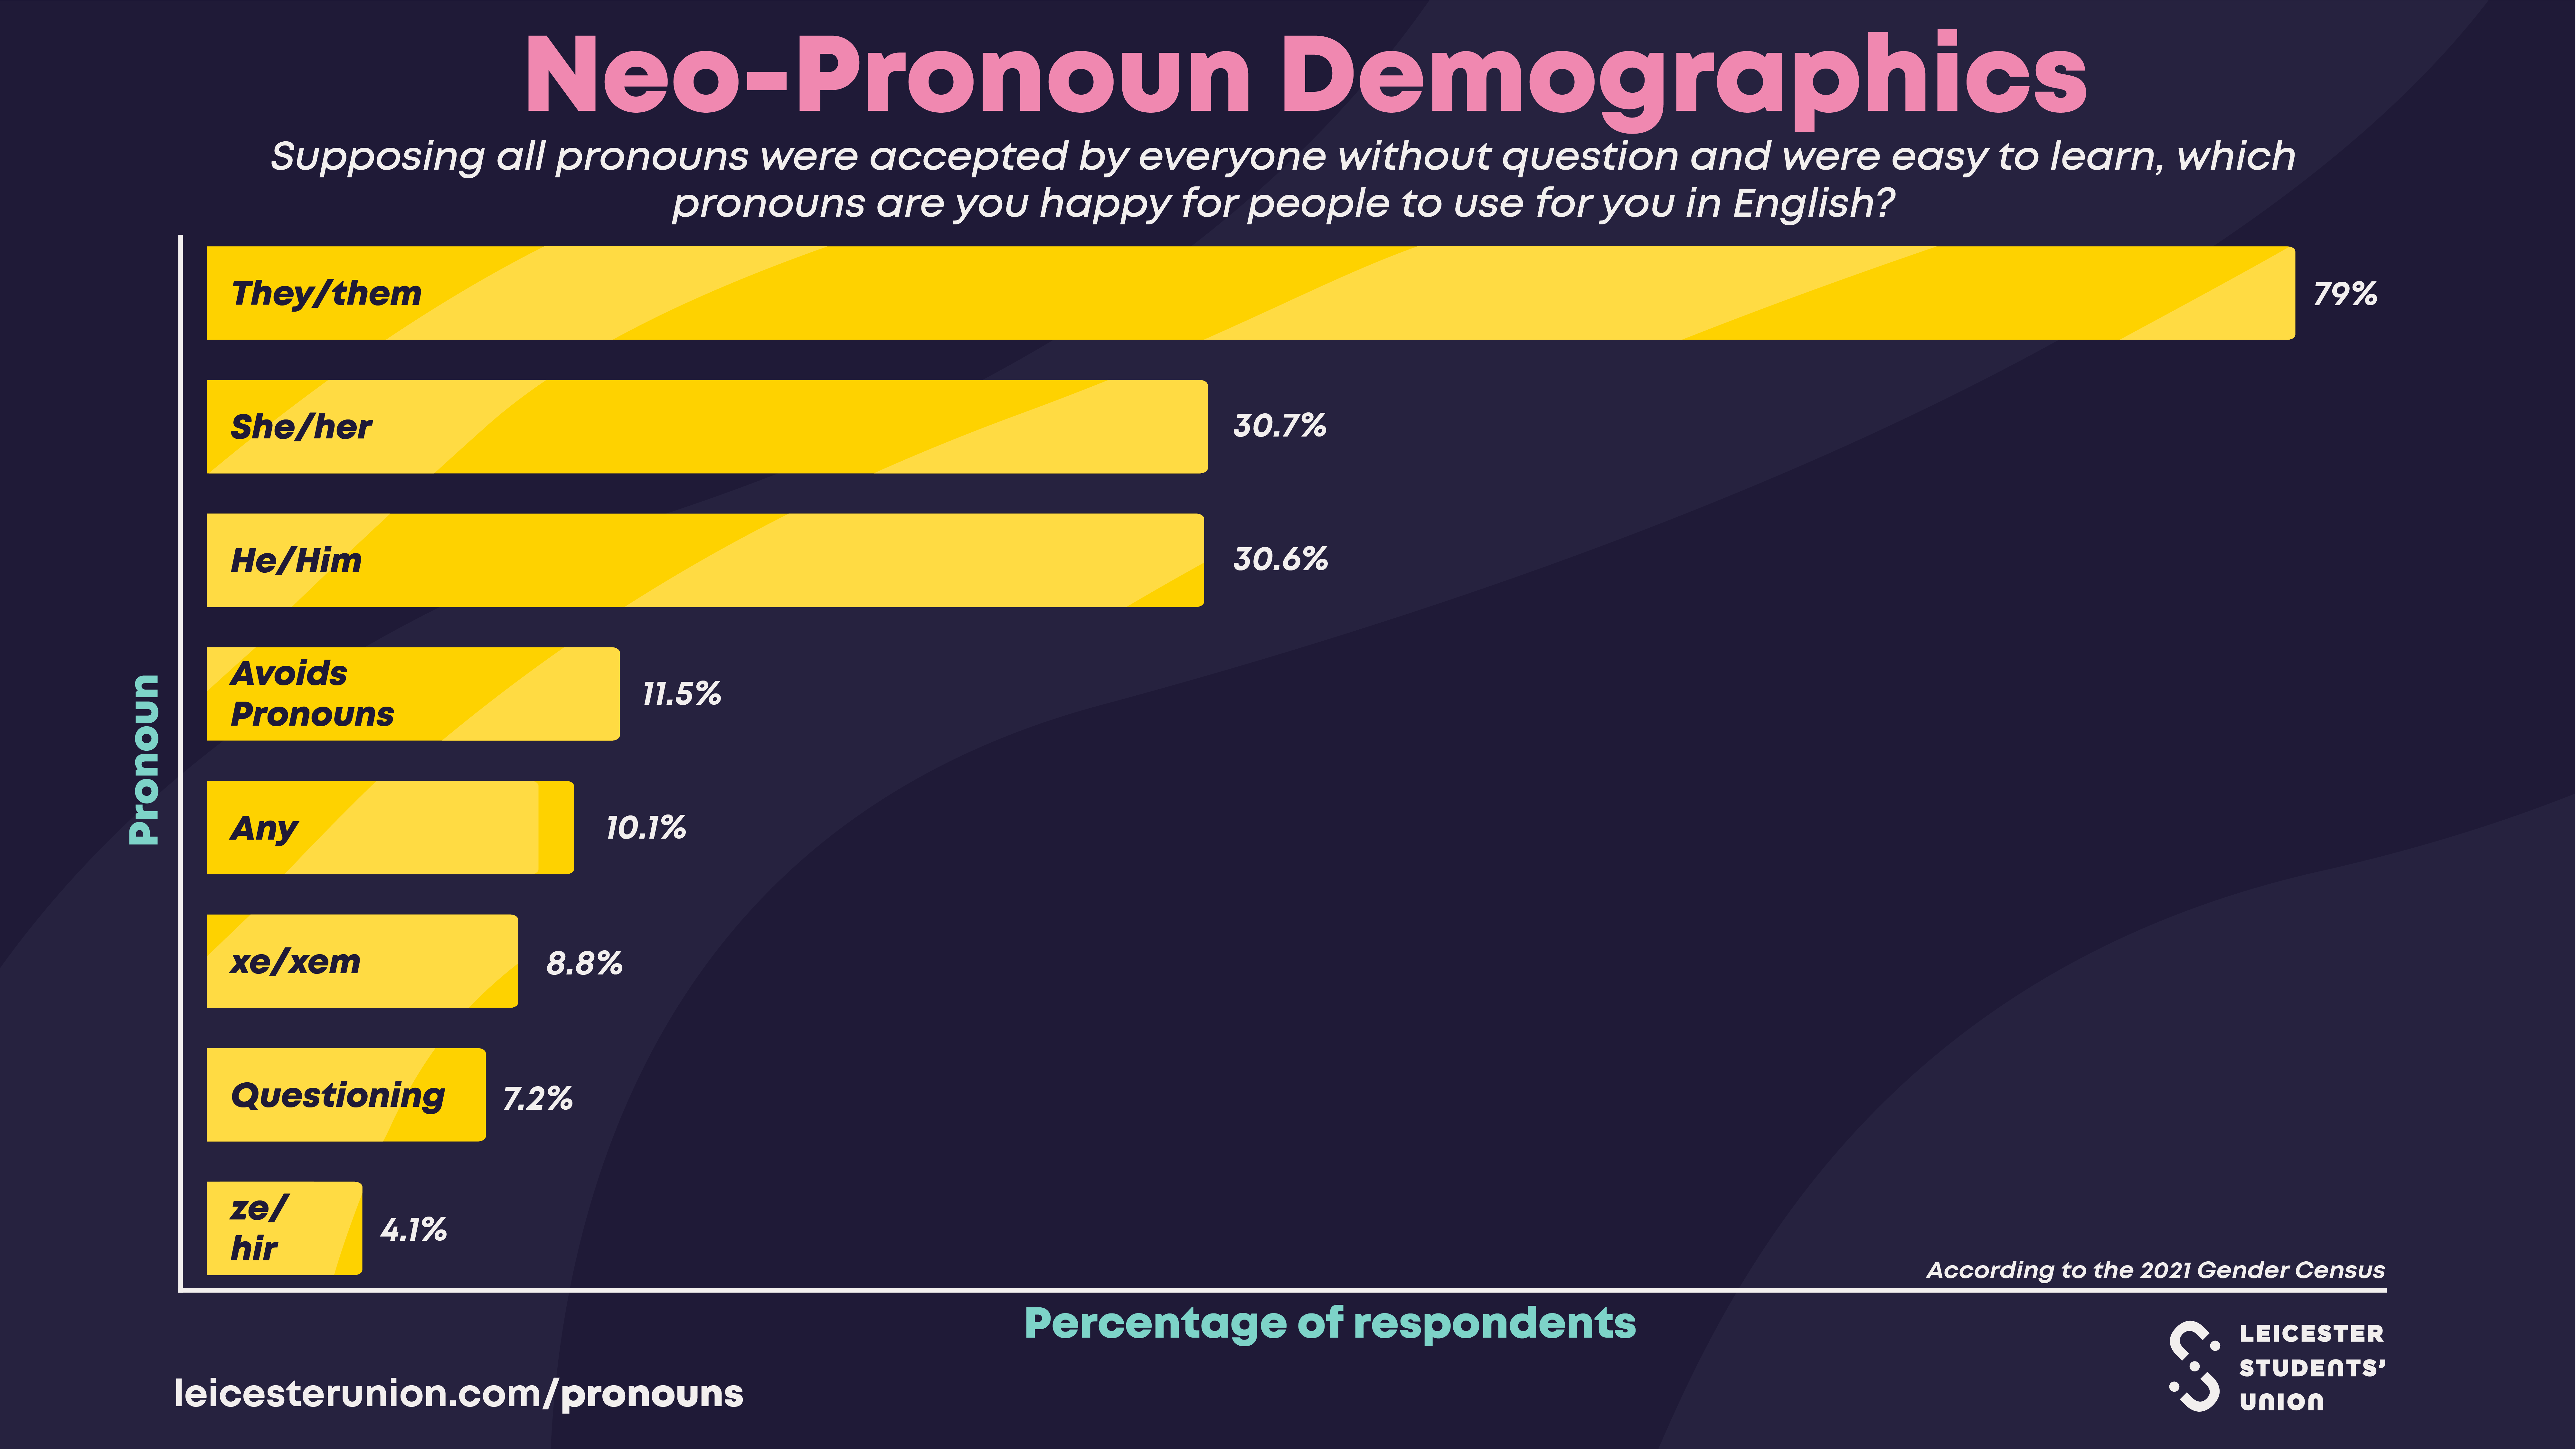 Neo-Pronoun Demographics. Supposing all pronouns were accepted by everyone without question and were easy to learn, which pronouns are you happy for people to use for you in English? They/Them: 79% respondents. She/her: 30.7% respondents. He/him: 30.4% respondents. Avoids pronouns: 11.5% respondents. Any: 10.7% respondents. Xe/xem: 8.8% respondents. Questioning: 7.3% respondents. Ze/hir: 4.1% respondents.